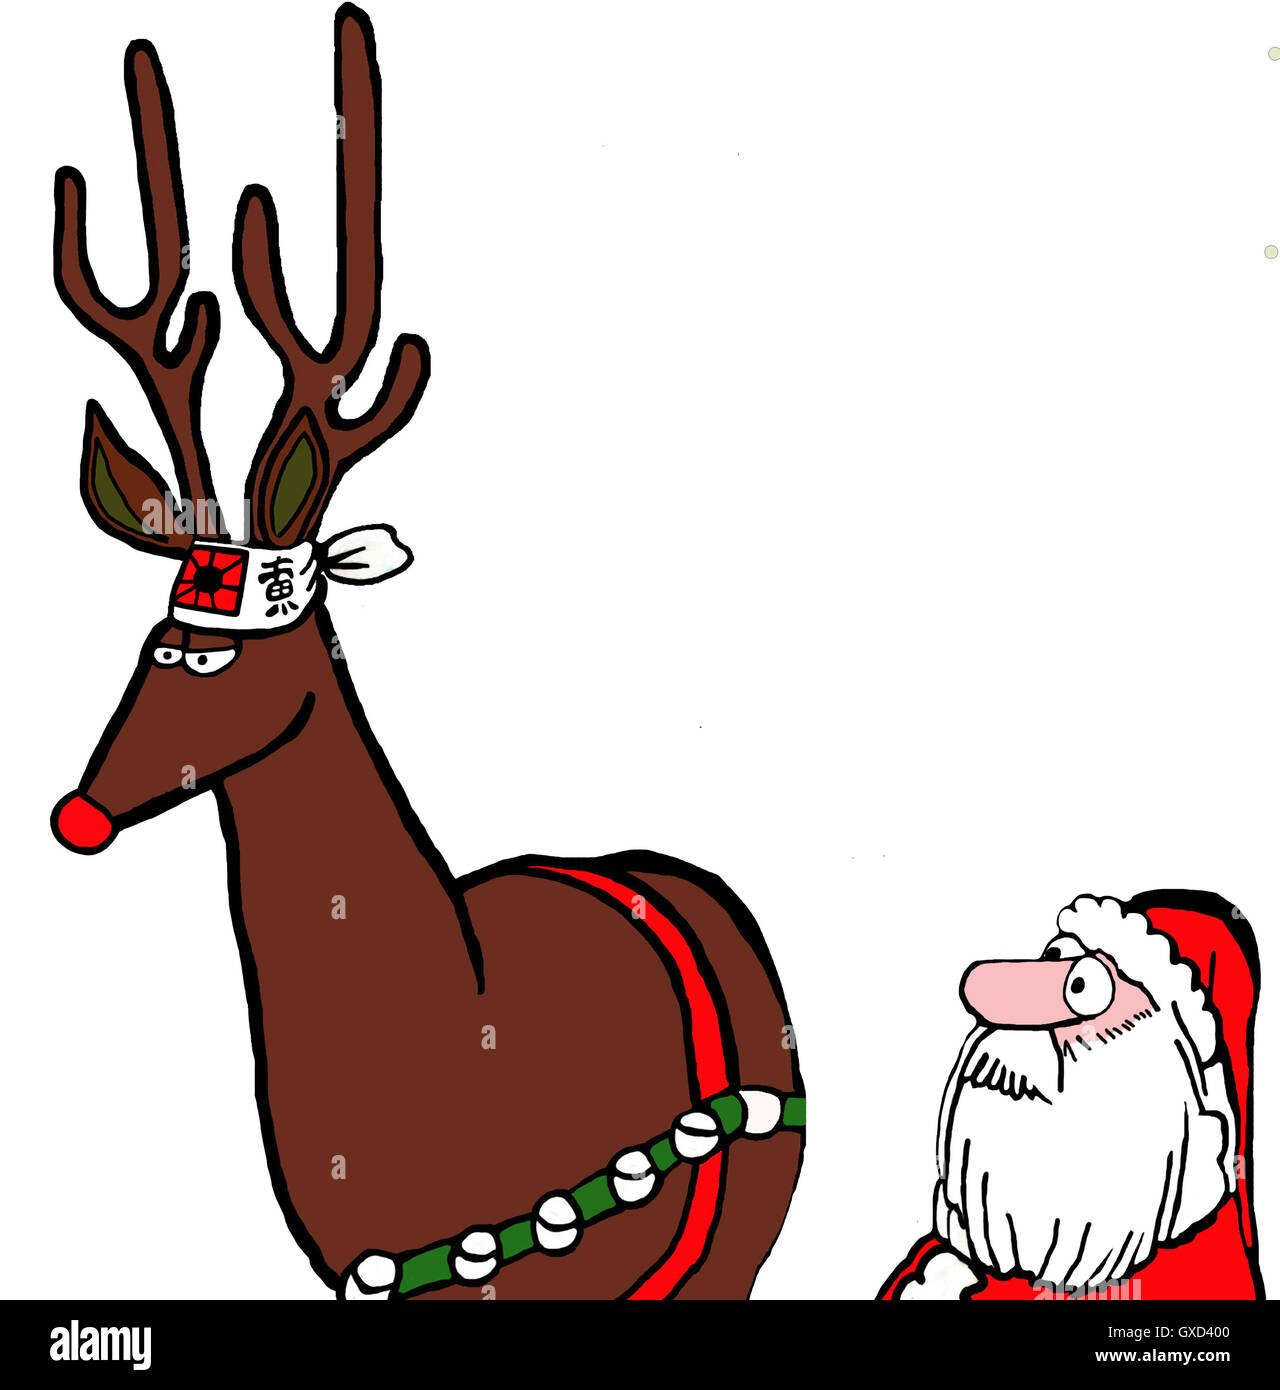 Color Christmas illustration of the red nosed reindeer wearing a kamikaze headband. Stock Photo